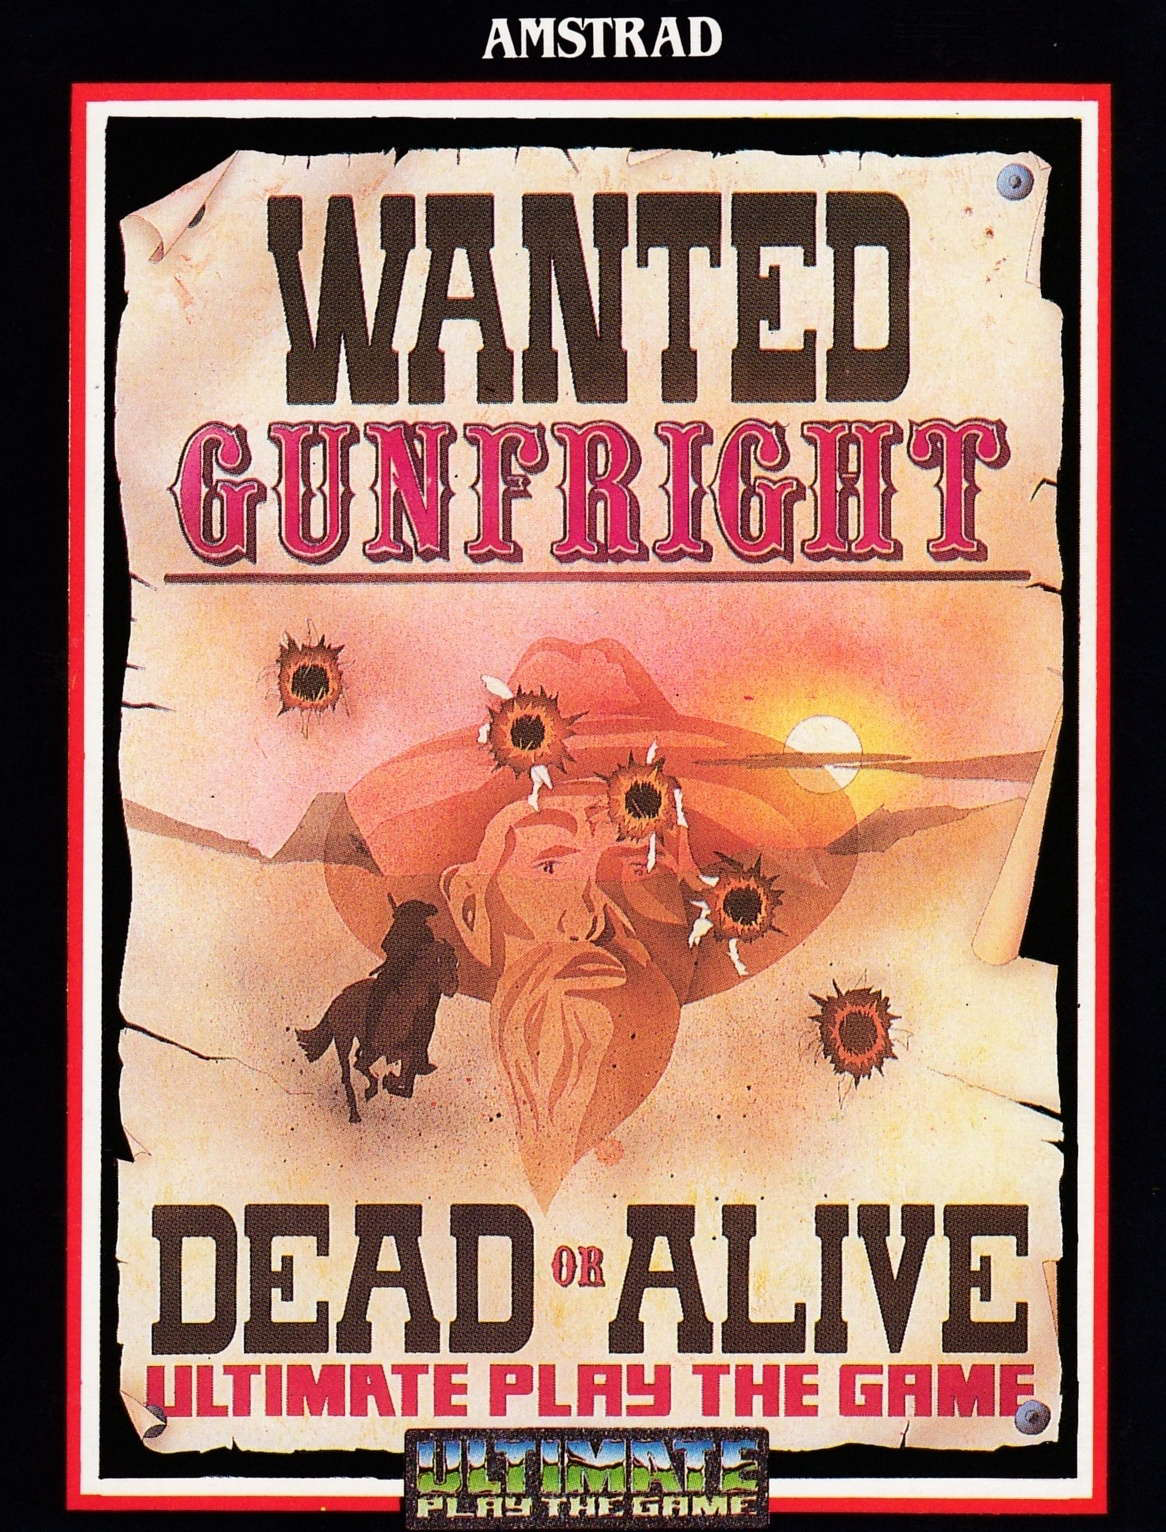 cover of the Amstrad CPC game Gunfright  by GameBase CPC